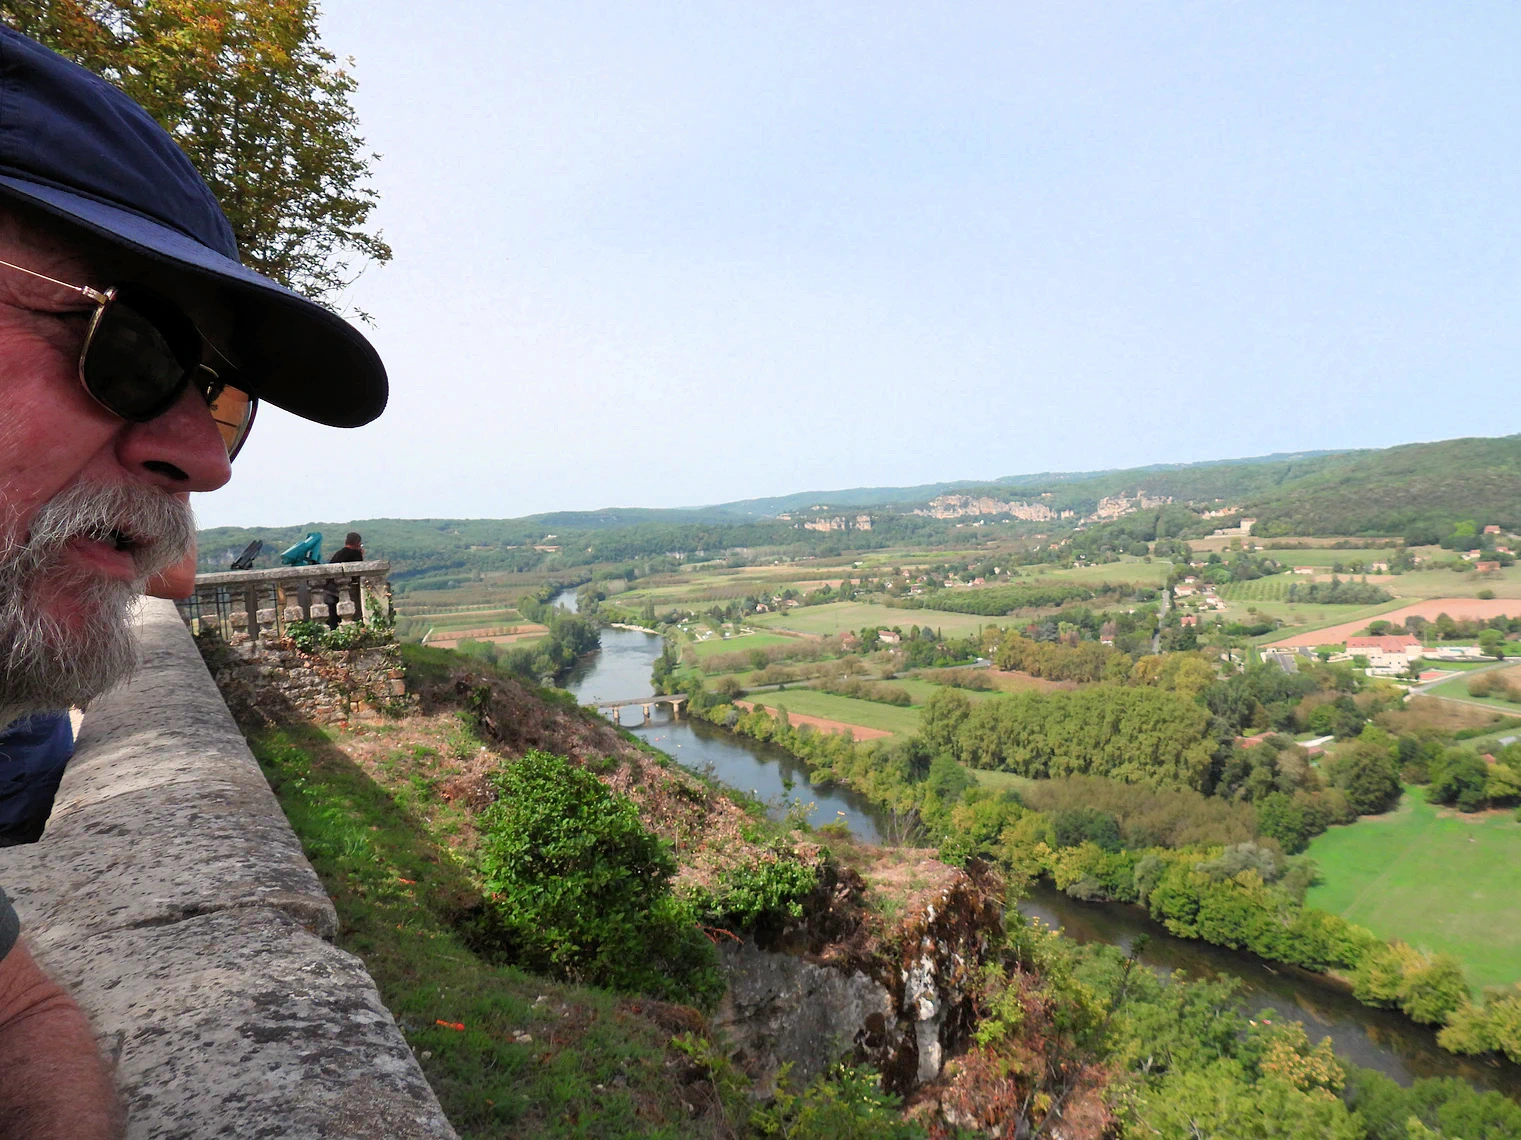 Uncover Dordogne Valley's secrets at Domme, France! Explore a charming medieval village perched atop a cliff. Visit the prehistoric Domme Cave, marvel at panoramic views, and discover local markets & shops. Perfect for history buffs, nature enthusiasts, and off-the-beaten-path adventures.